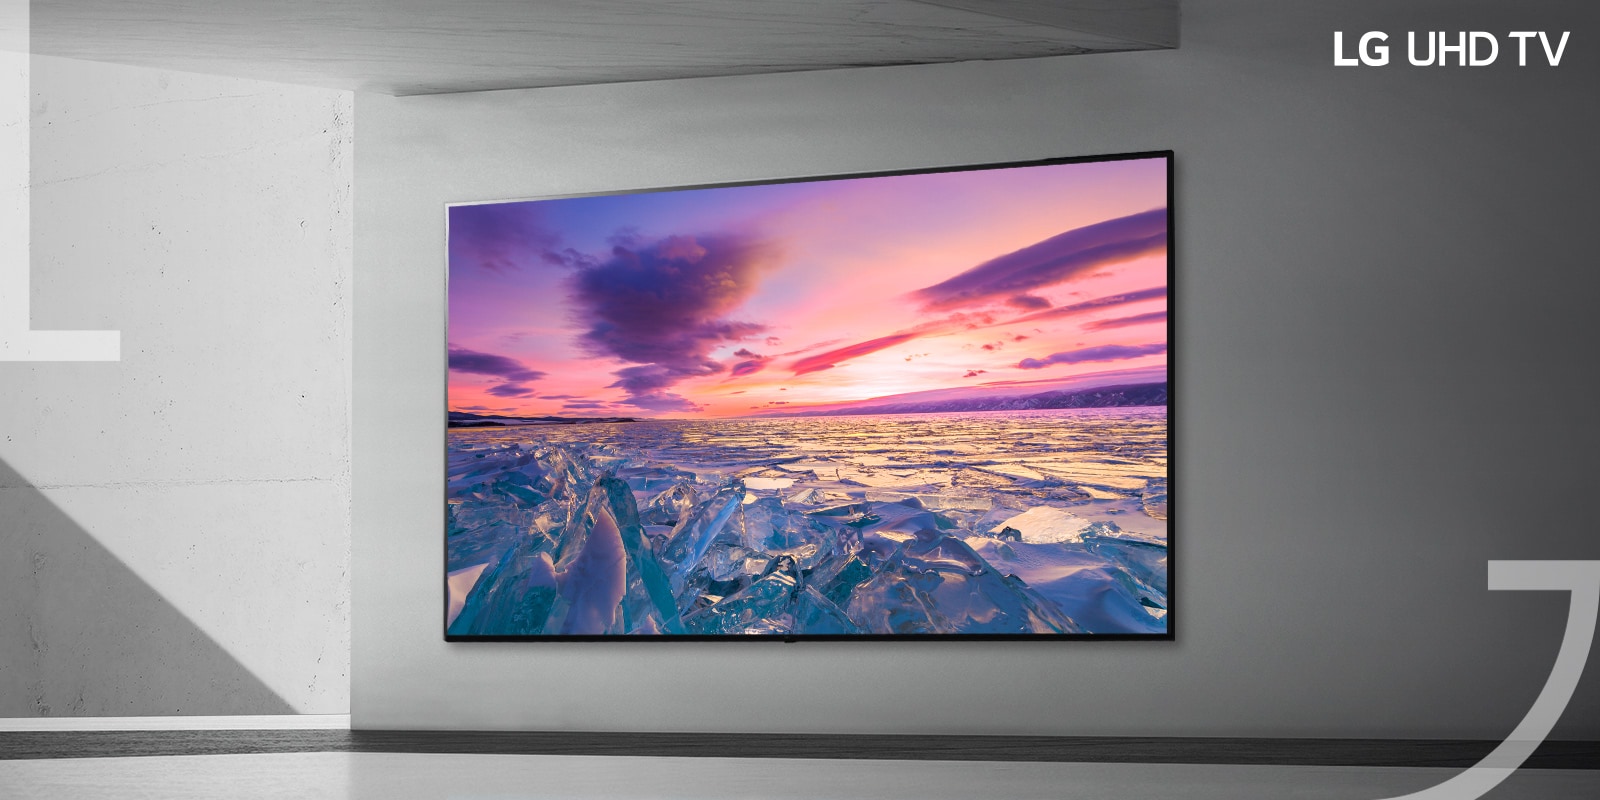 A TV in a stark room displays bright and vivid sunset on the screen.